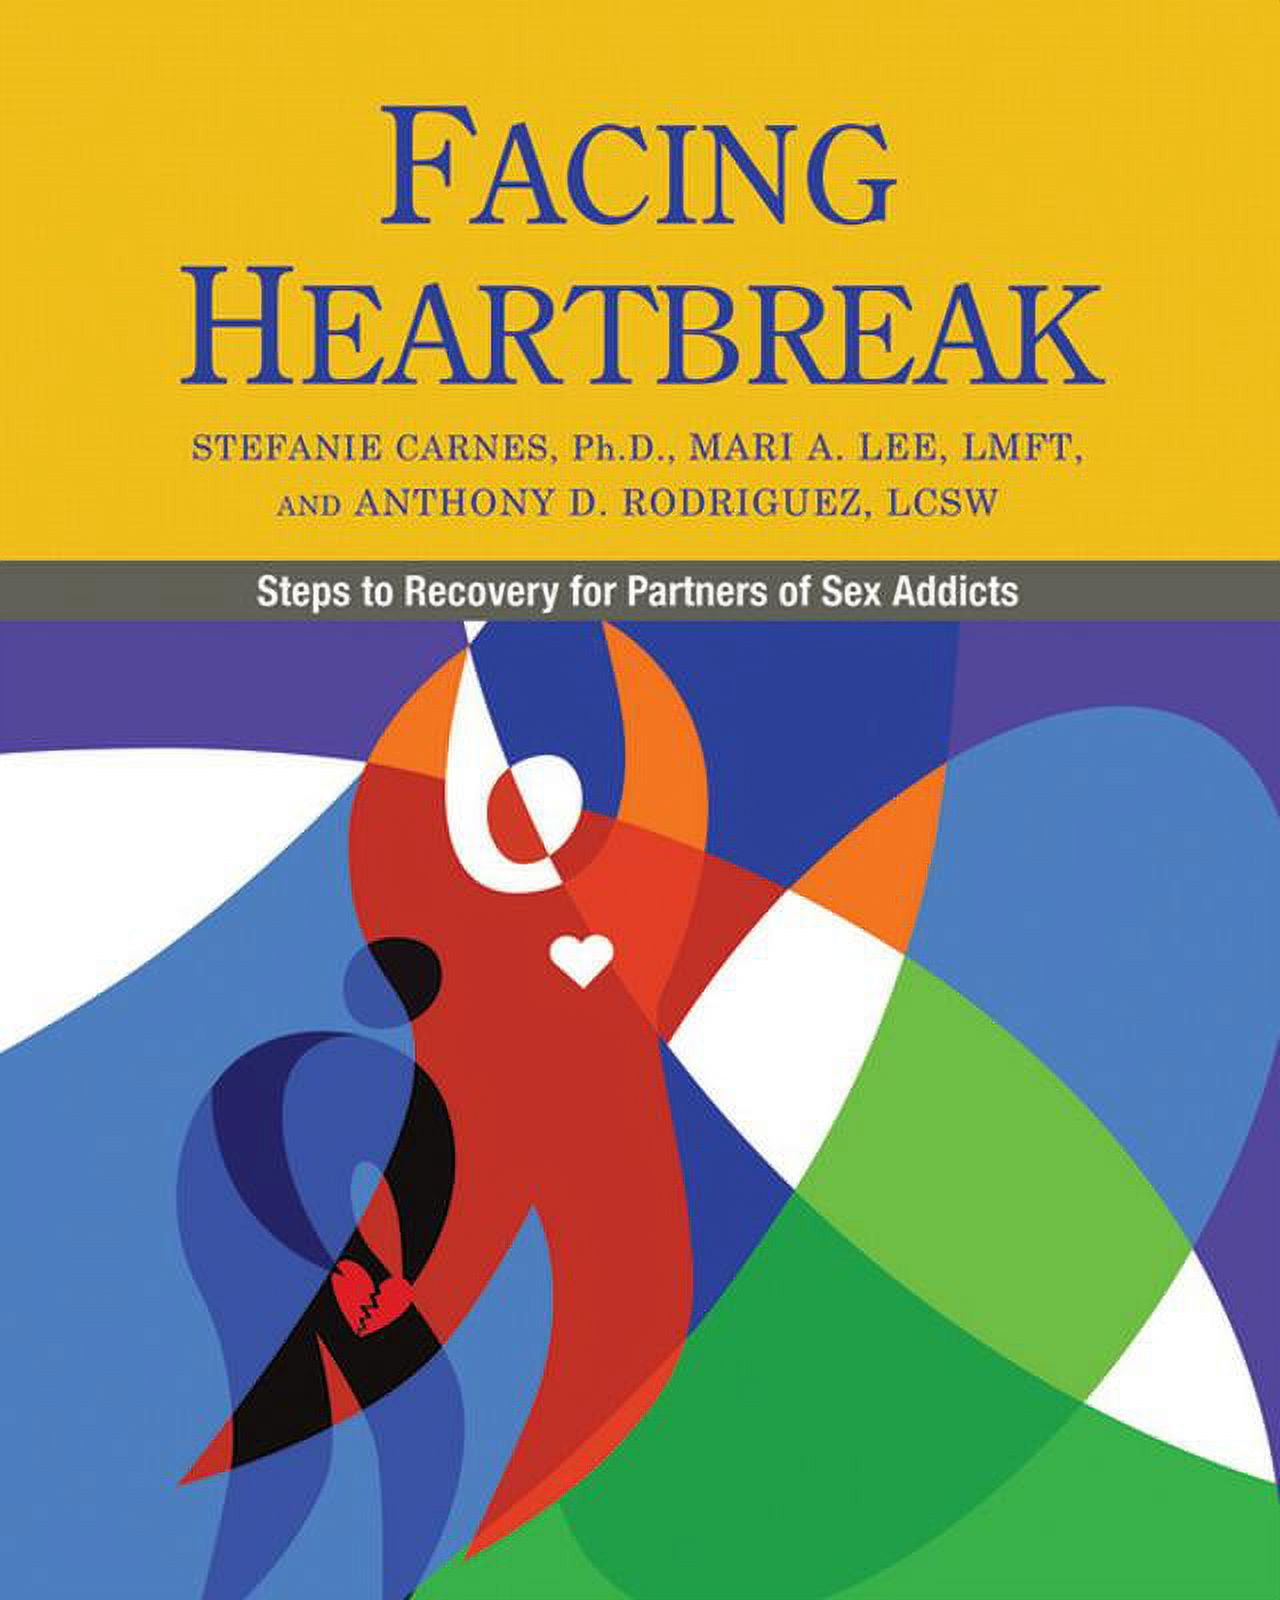 Facing Heartbreak Steps to Recovery for Partners of Sex Addicts (Paperback)